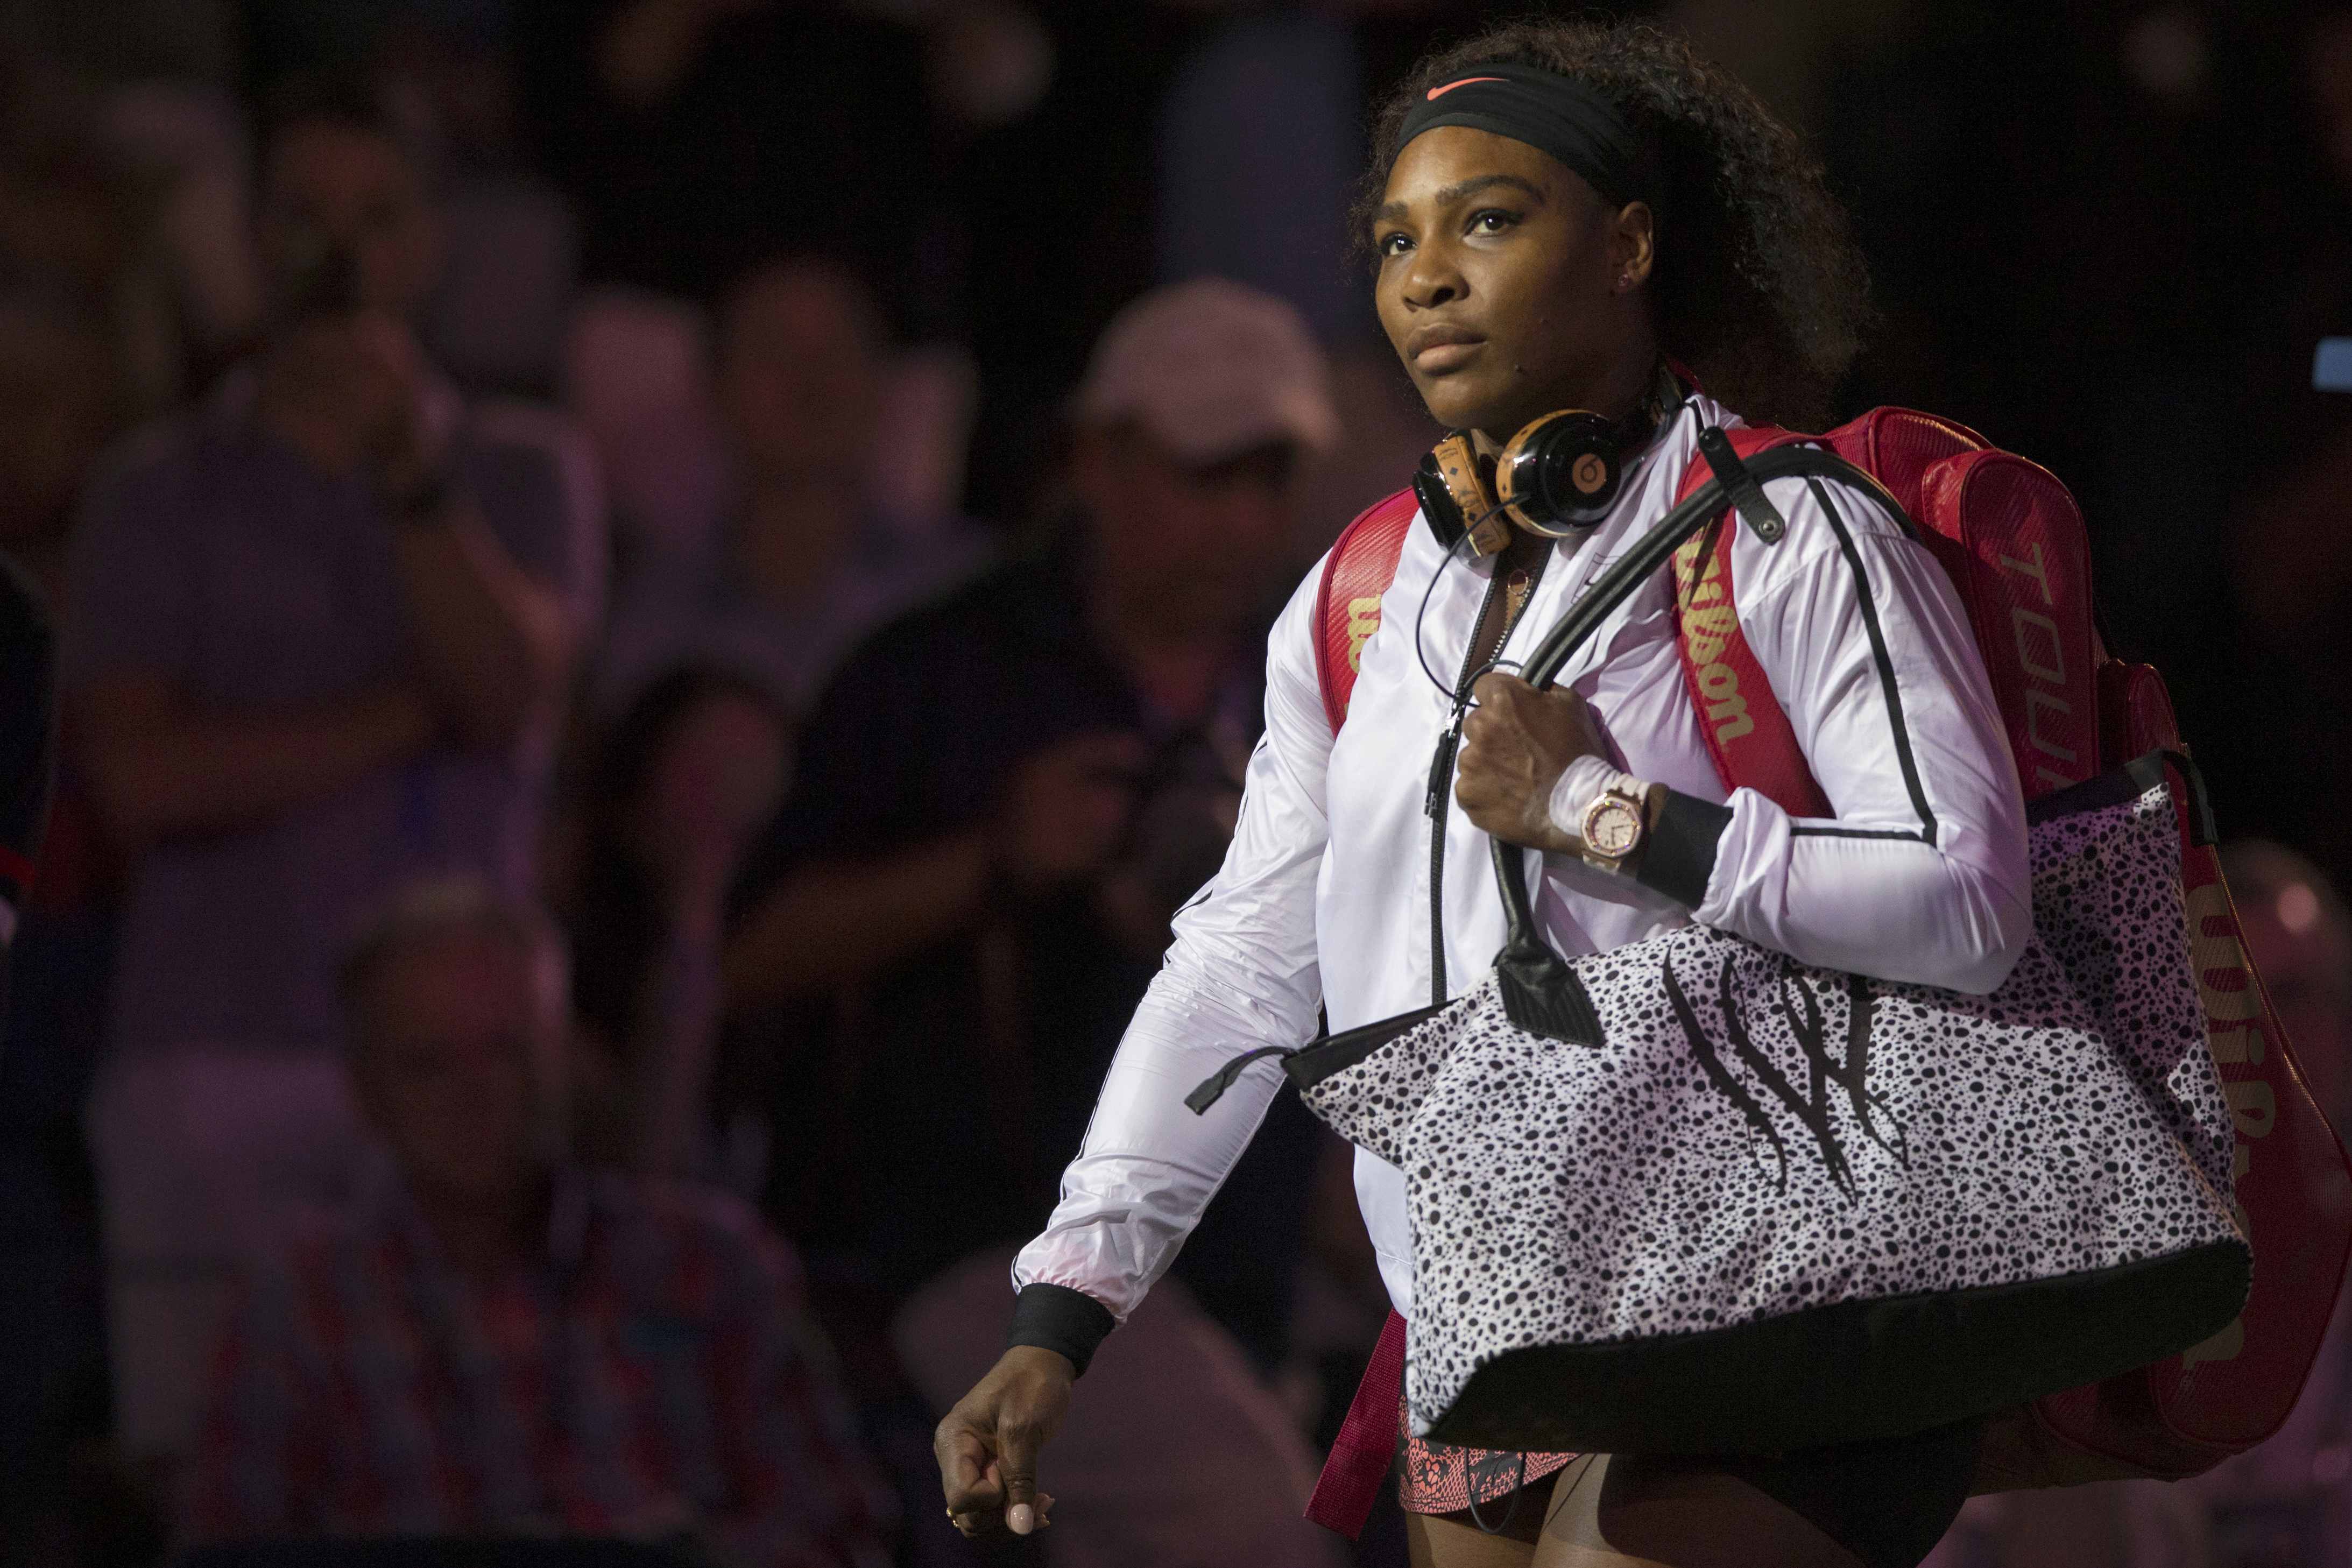 major draw such is the star power of serena that auckland classic organisers still want her back in 2018 despite her comments causing damage to the their brand photo reuters